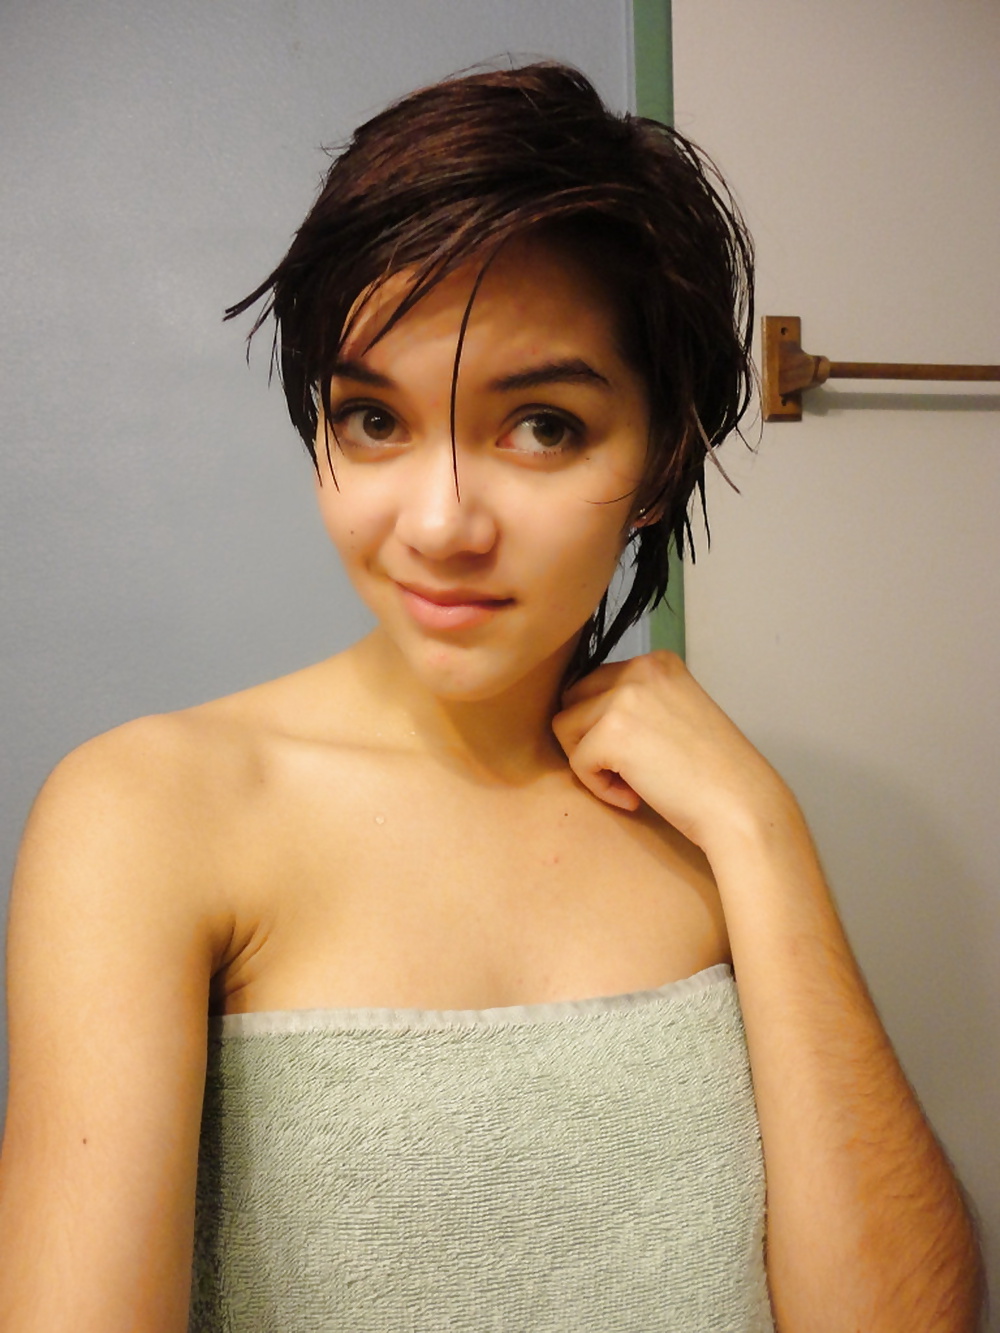 Pretty girl in the shower (Amateur) #29176833